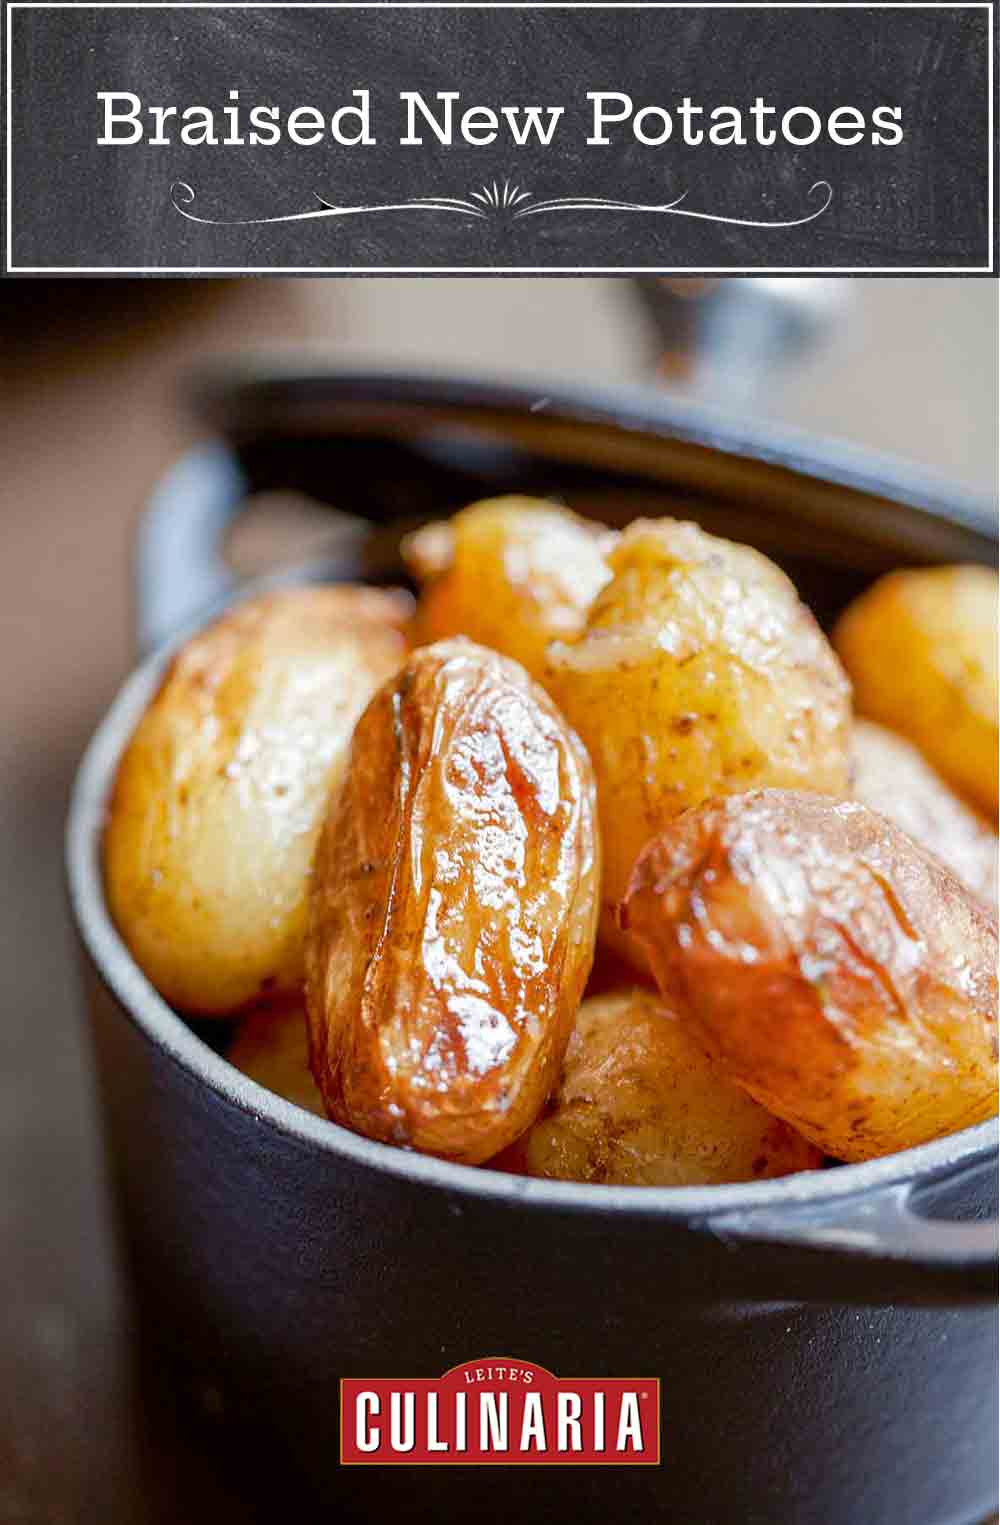 Cast iron pot with braised new potatoes inside